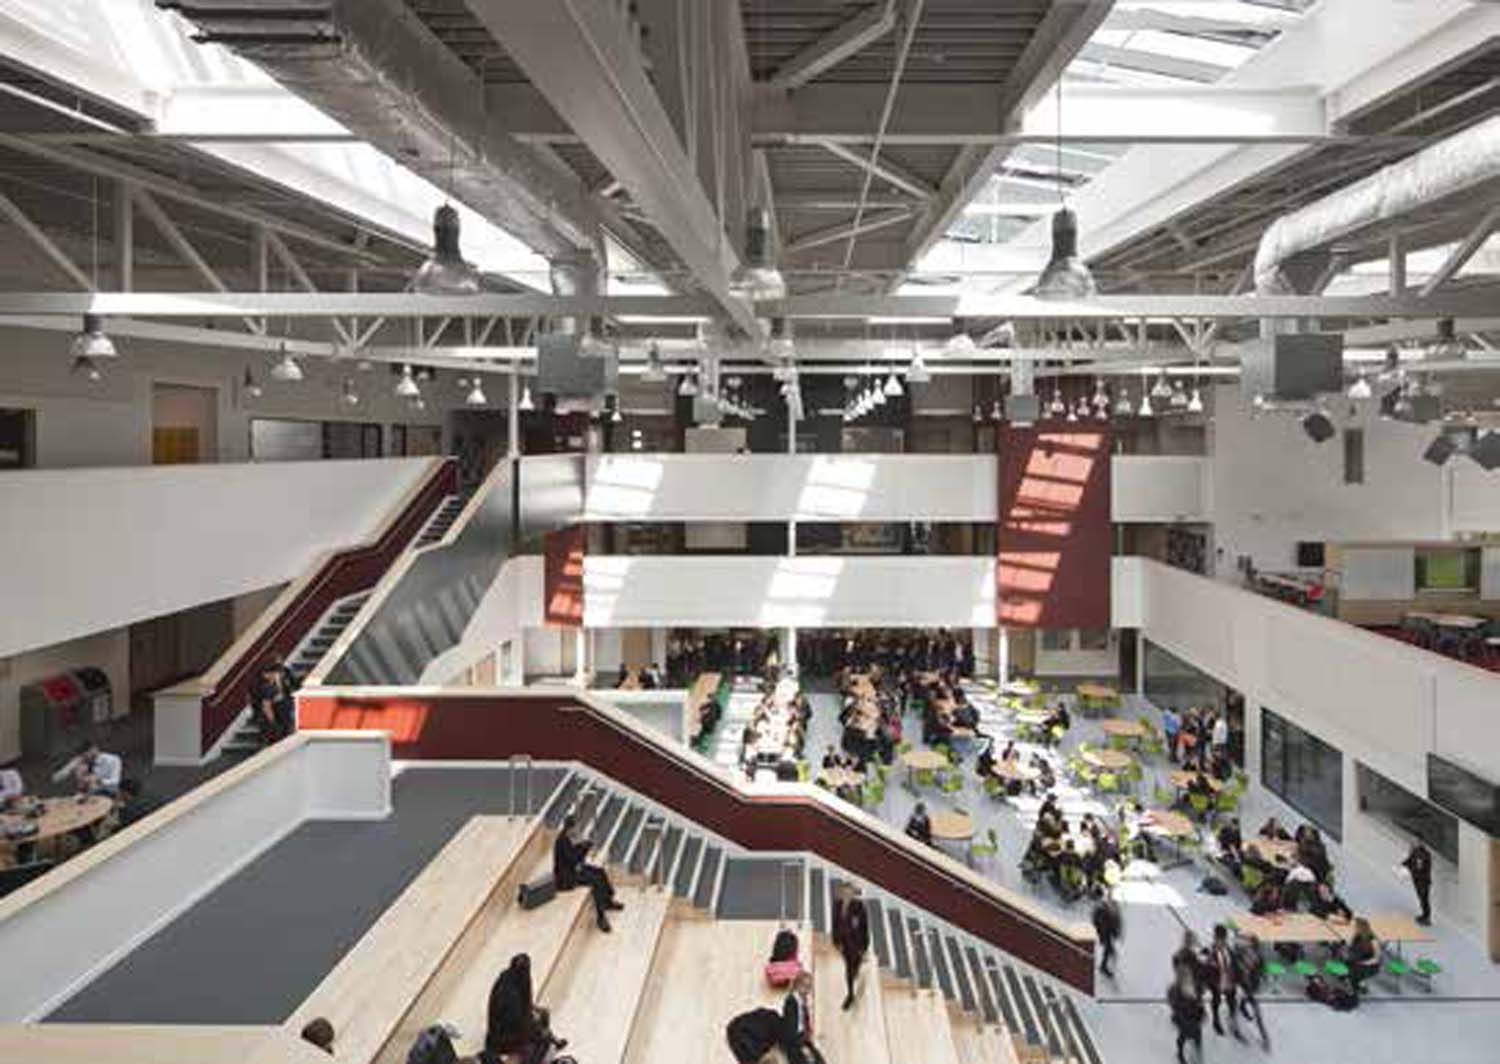 A two-storey atrium space filled with students. There are tables and amphitheatre sitting, and several spaces open up towards the atrium.